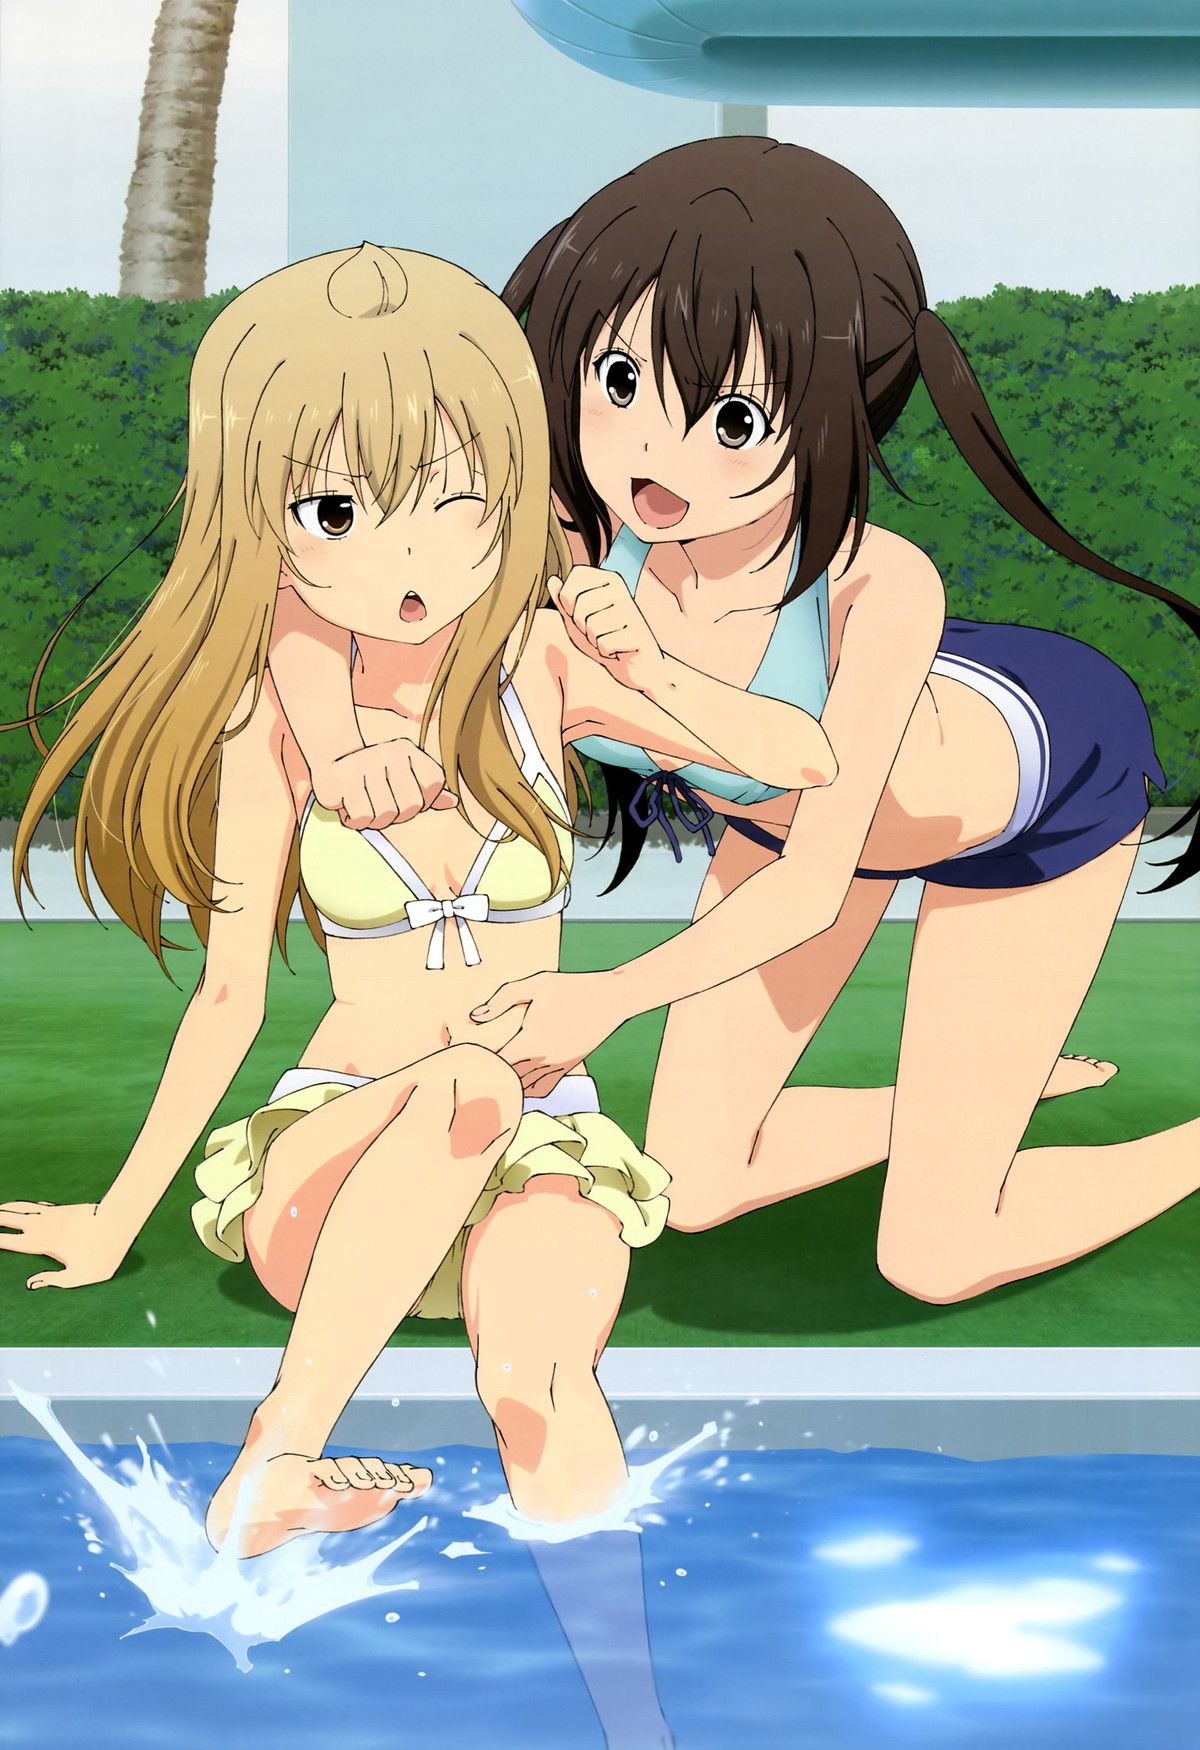 The official image of beautiful girl anime is too cute erotic wwwwwww 1